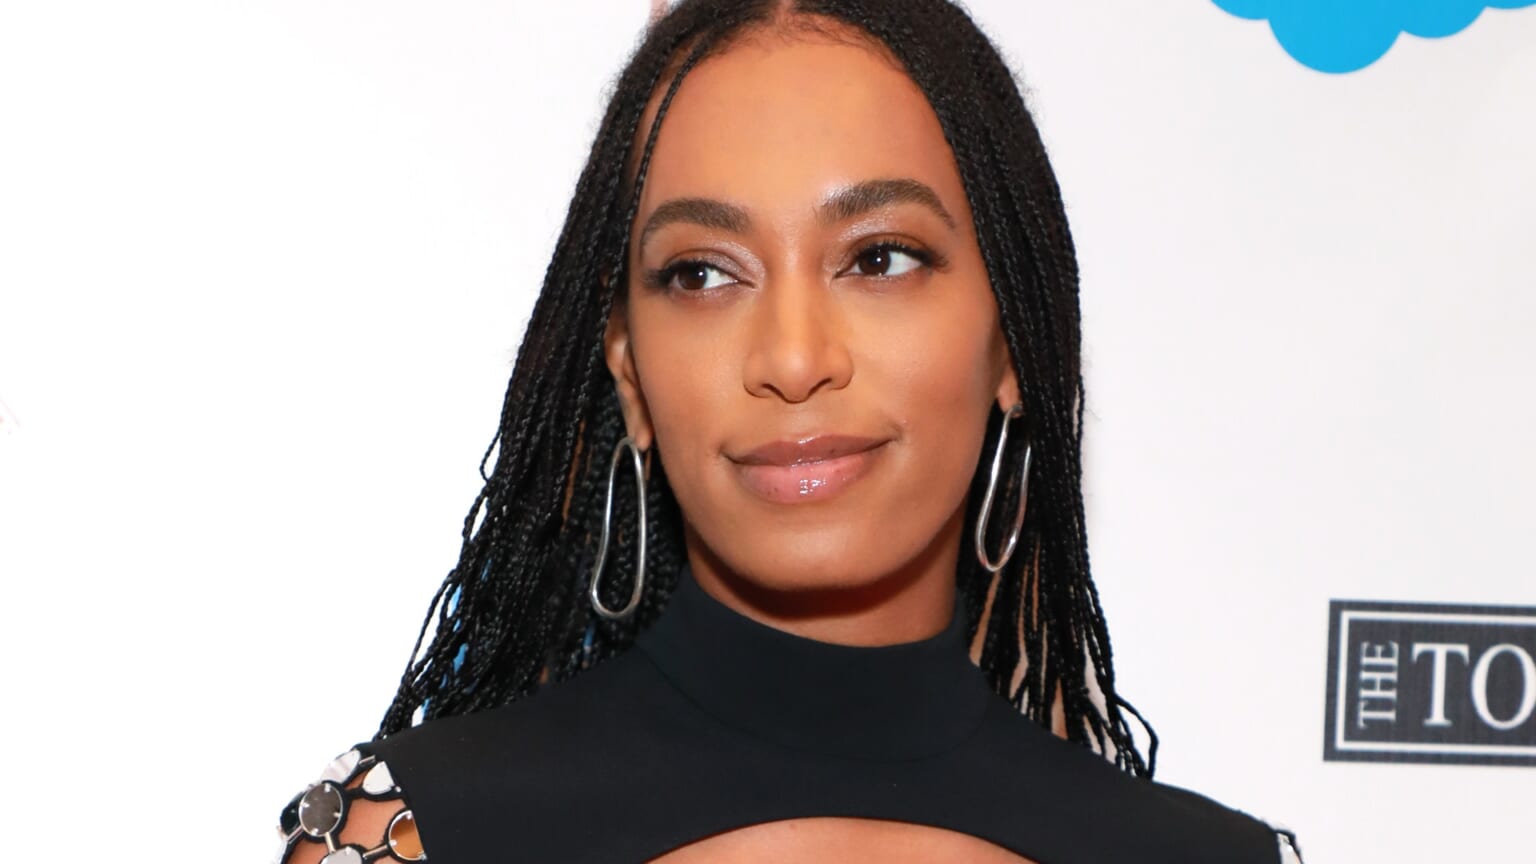 Solange was ‘fighting’ for her life while recording ‘When I Get Home’ album